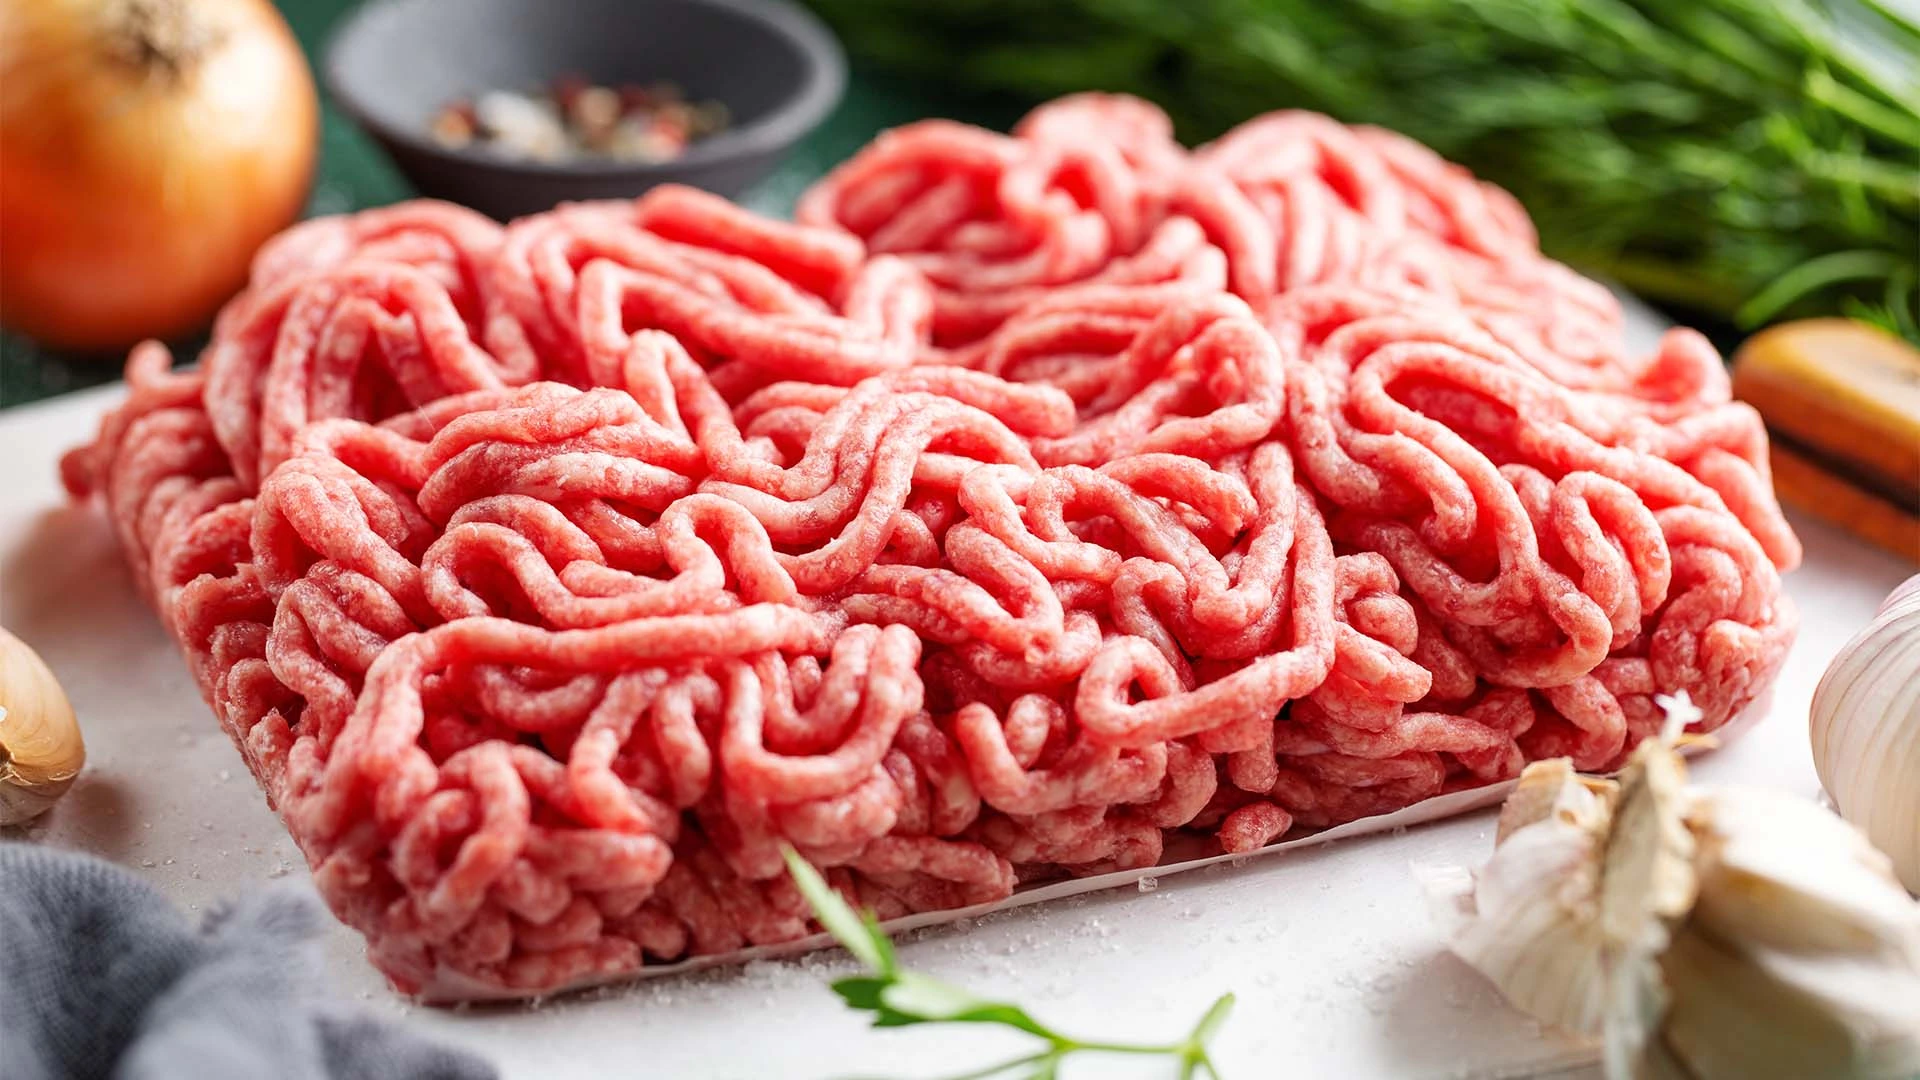 fresh-minced-meat-ready-cooking